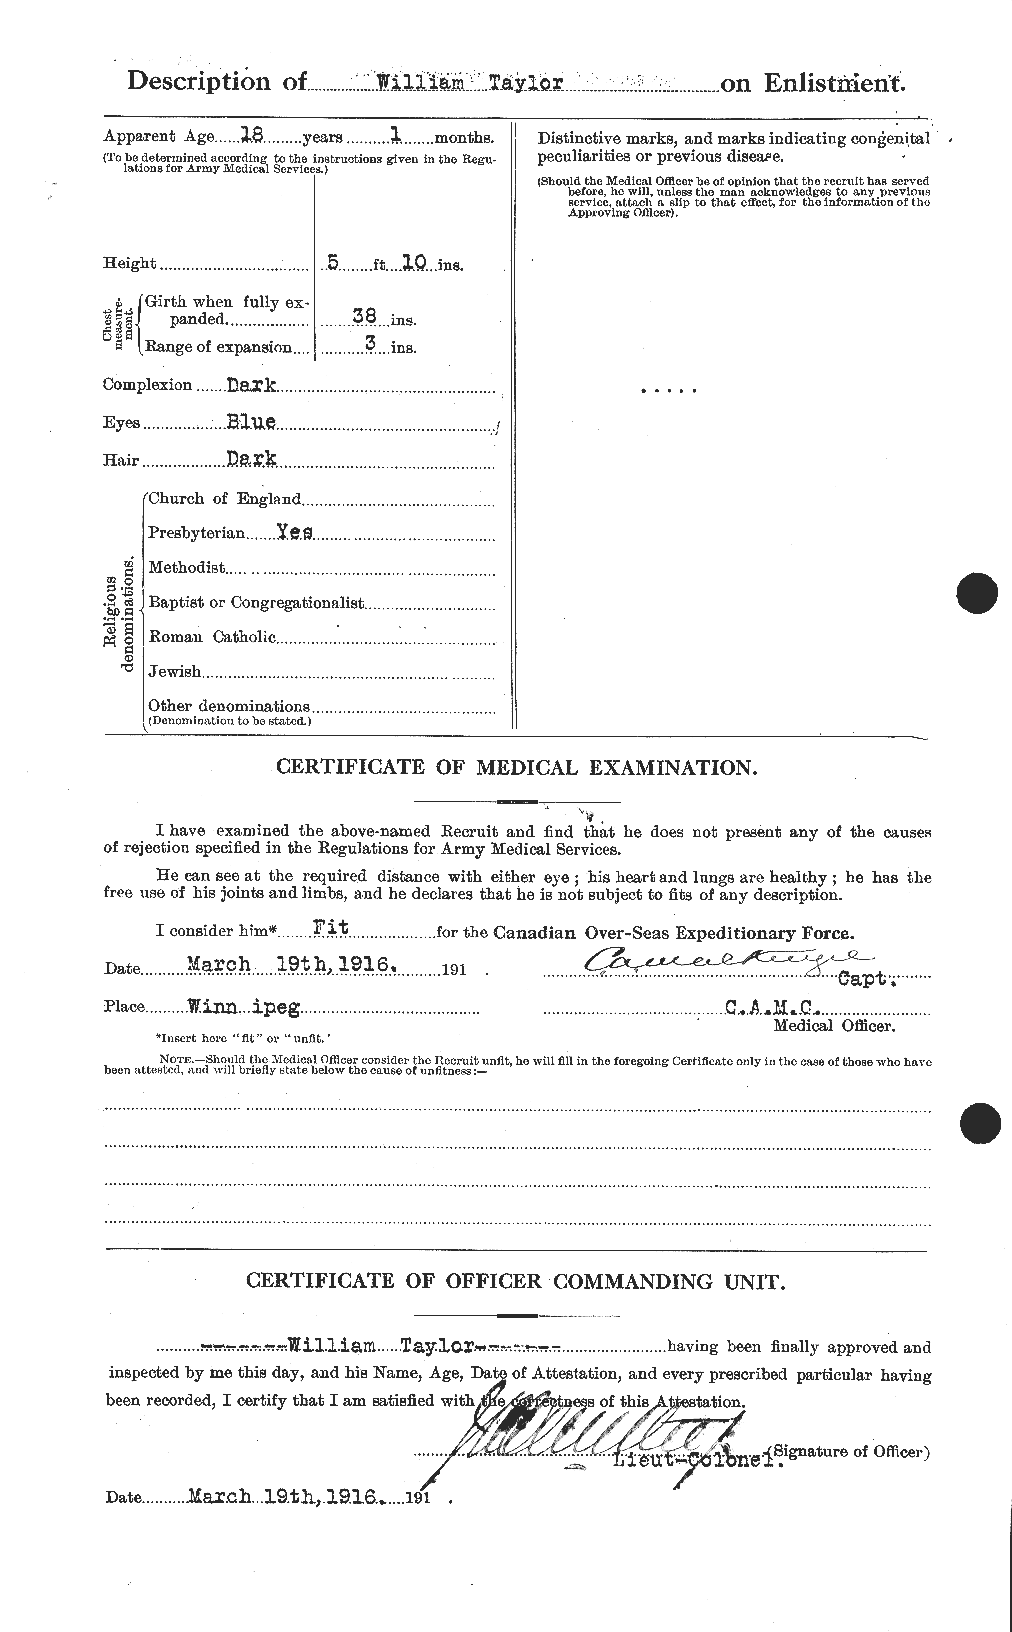 Personnel Records of the First World War - CEF 628191b